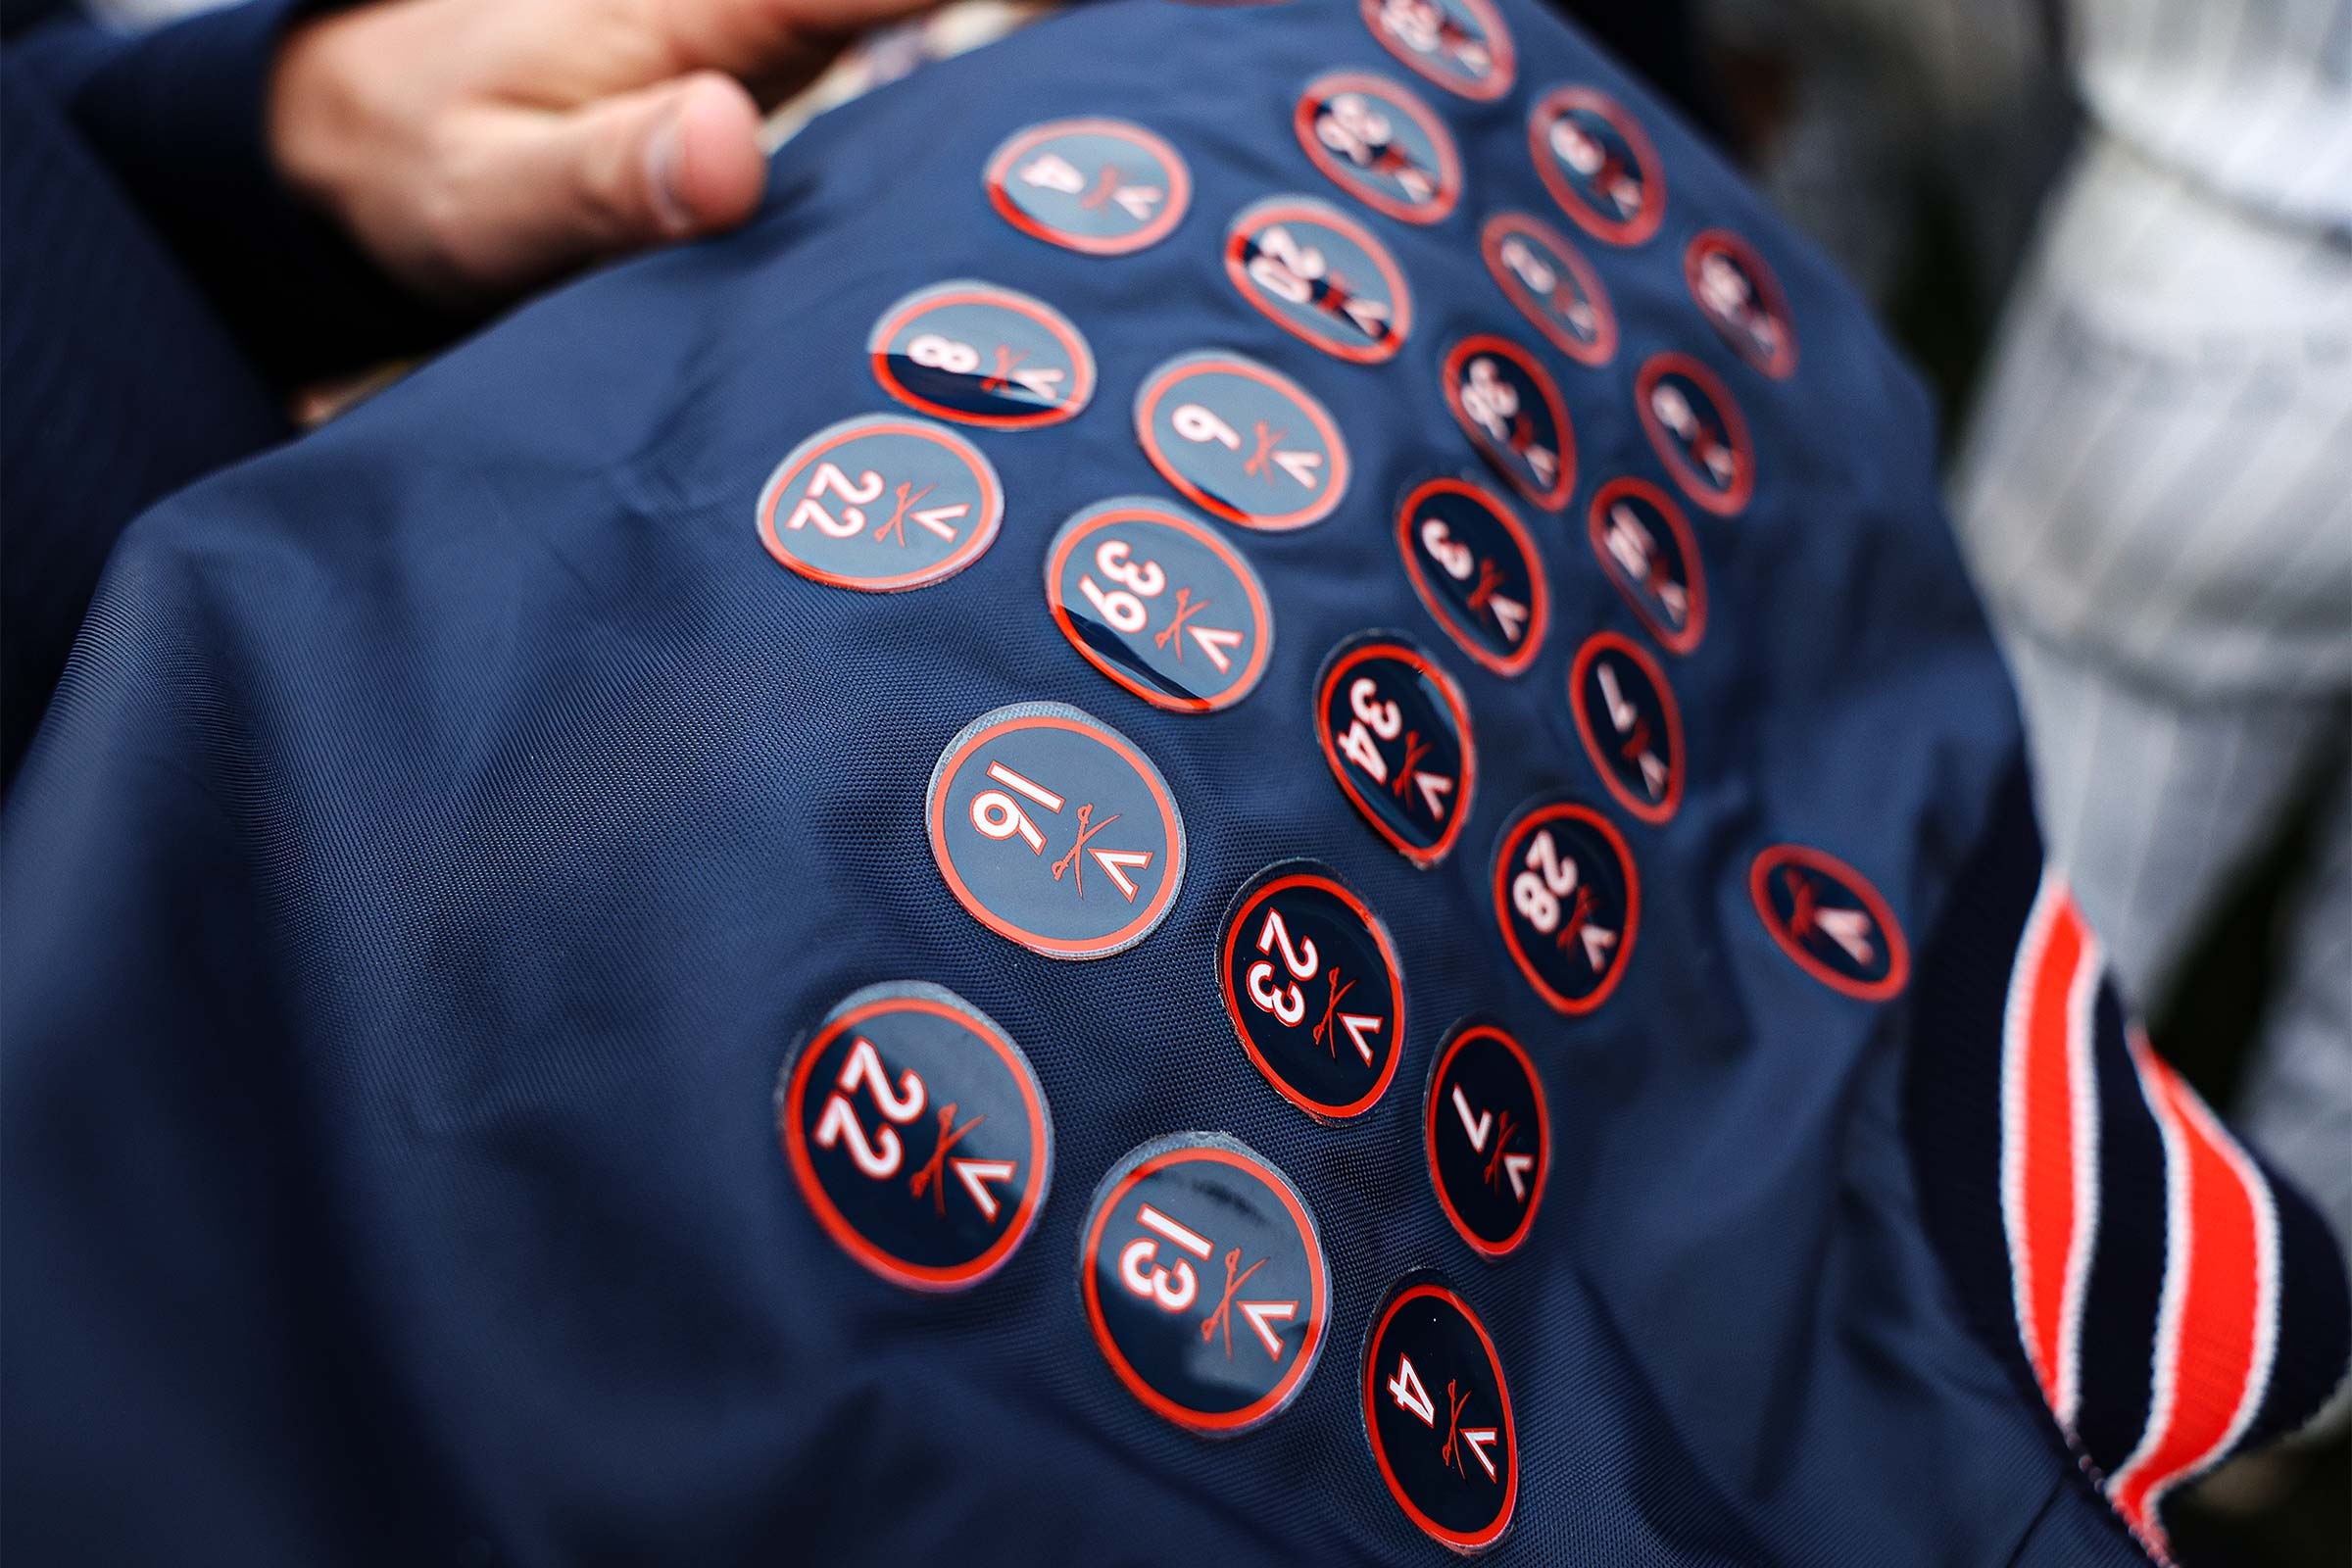 The back of The Jacket featuring players numbers